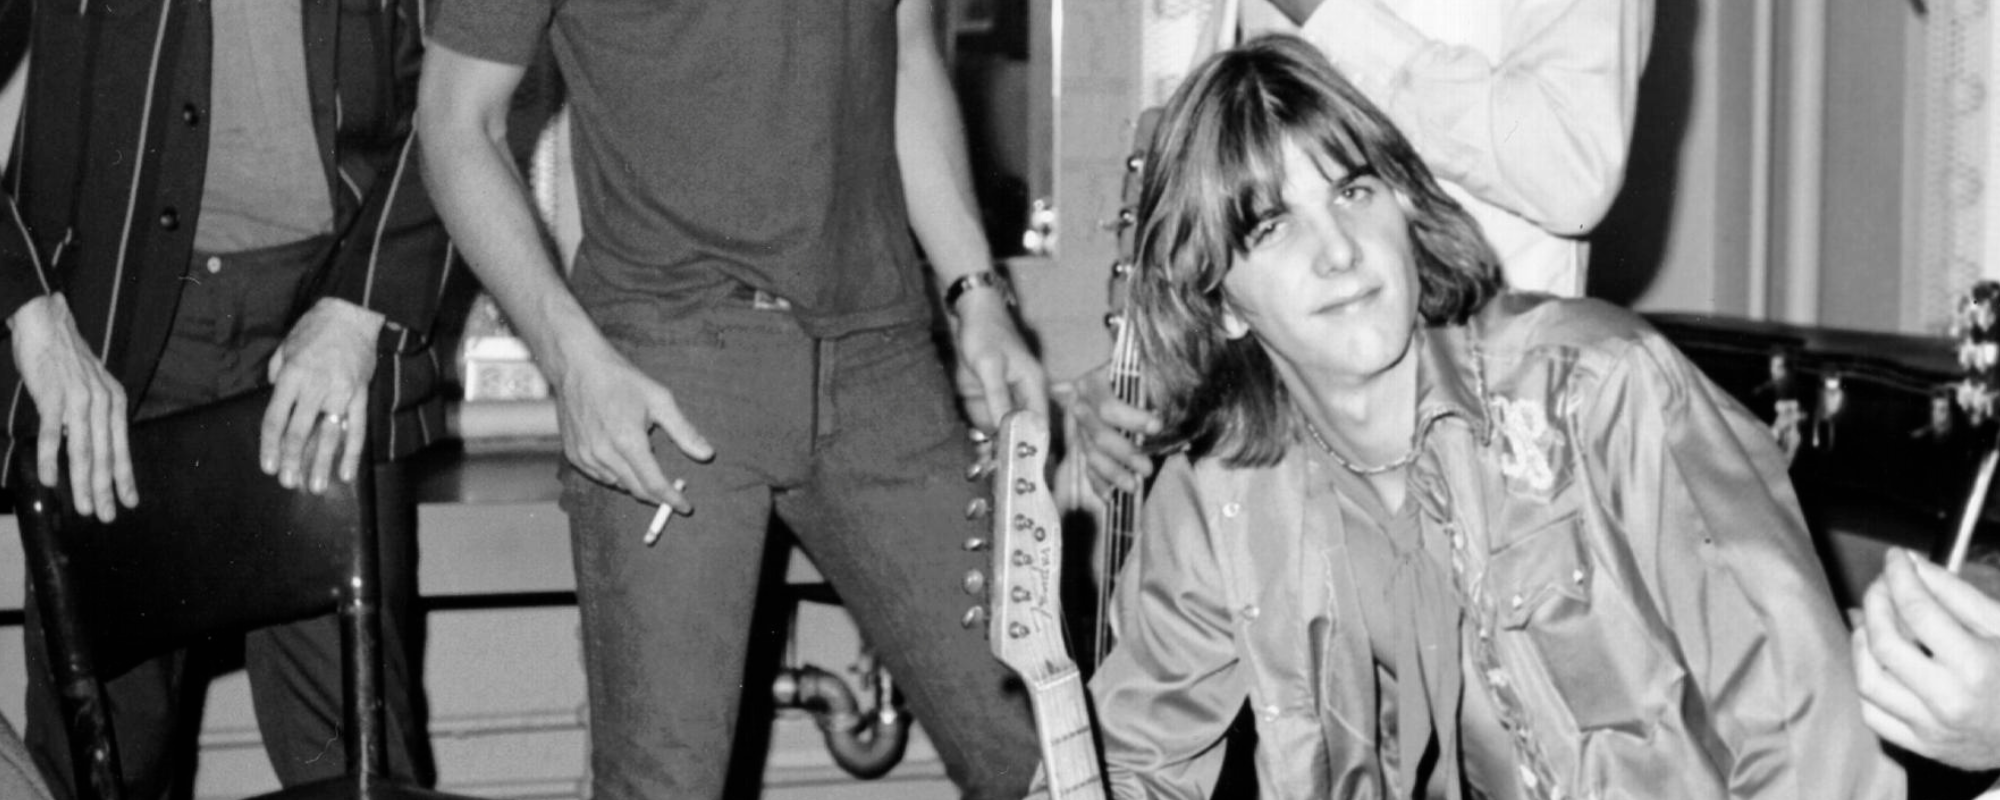 The Wild Story of a Wounded Troubadour’s Travelogue: The Meaning Behind “Return of the Grievous Angel” by Gram Parsons